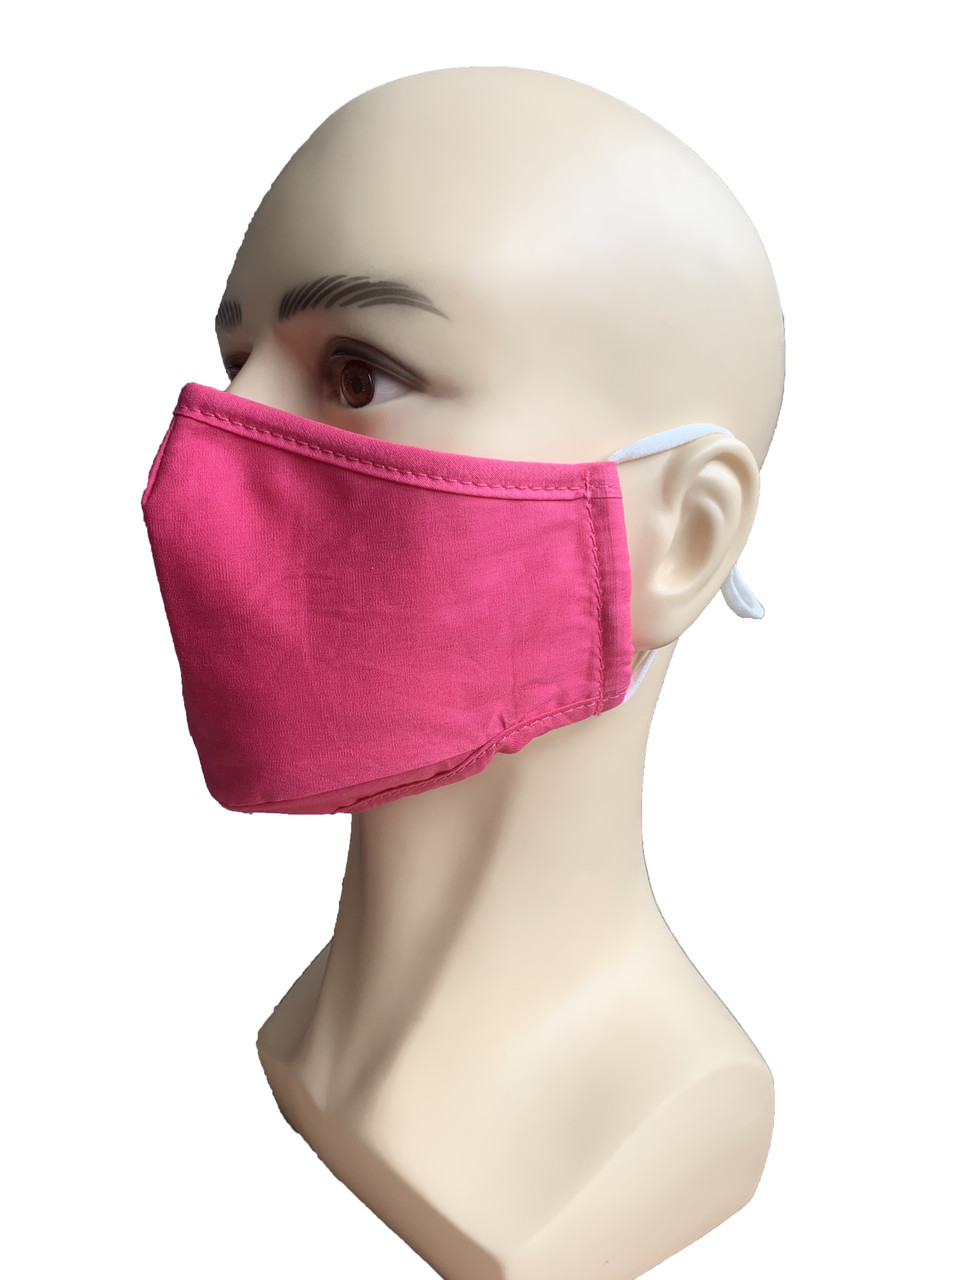 ODS Reusable 3-Layer Cotton Face Mask with PM2.5 Carbon Filter, Pink, 4/pk